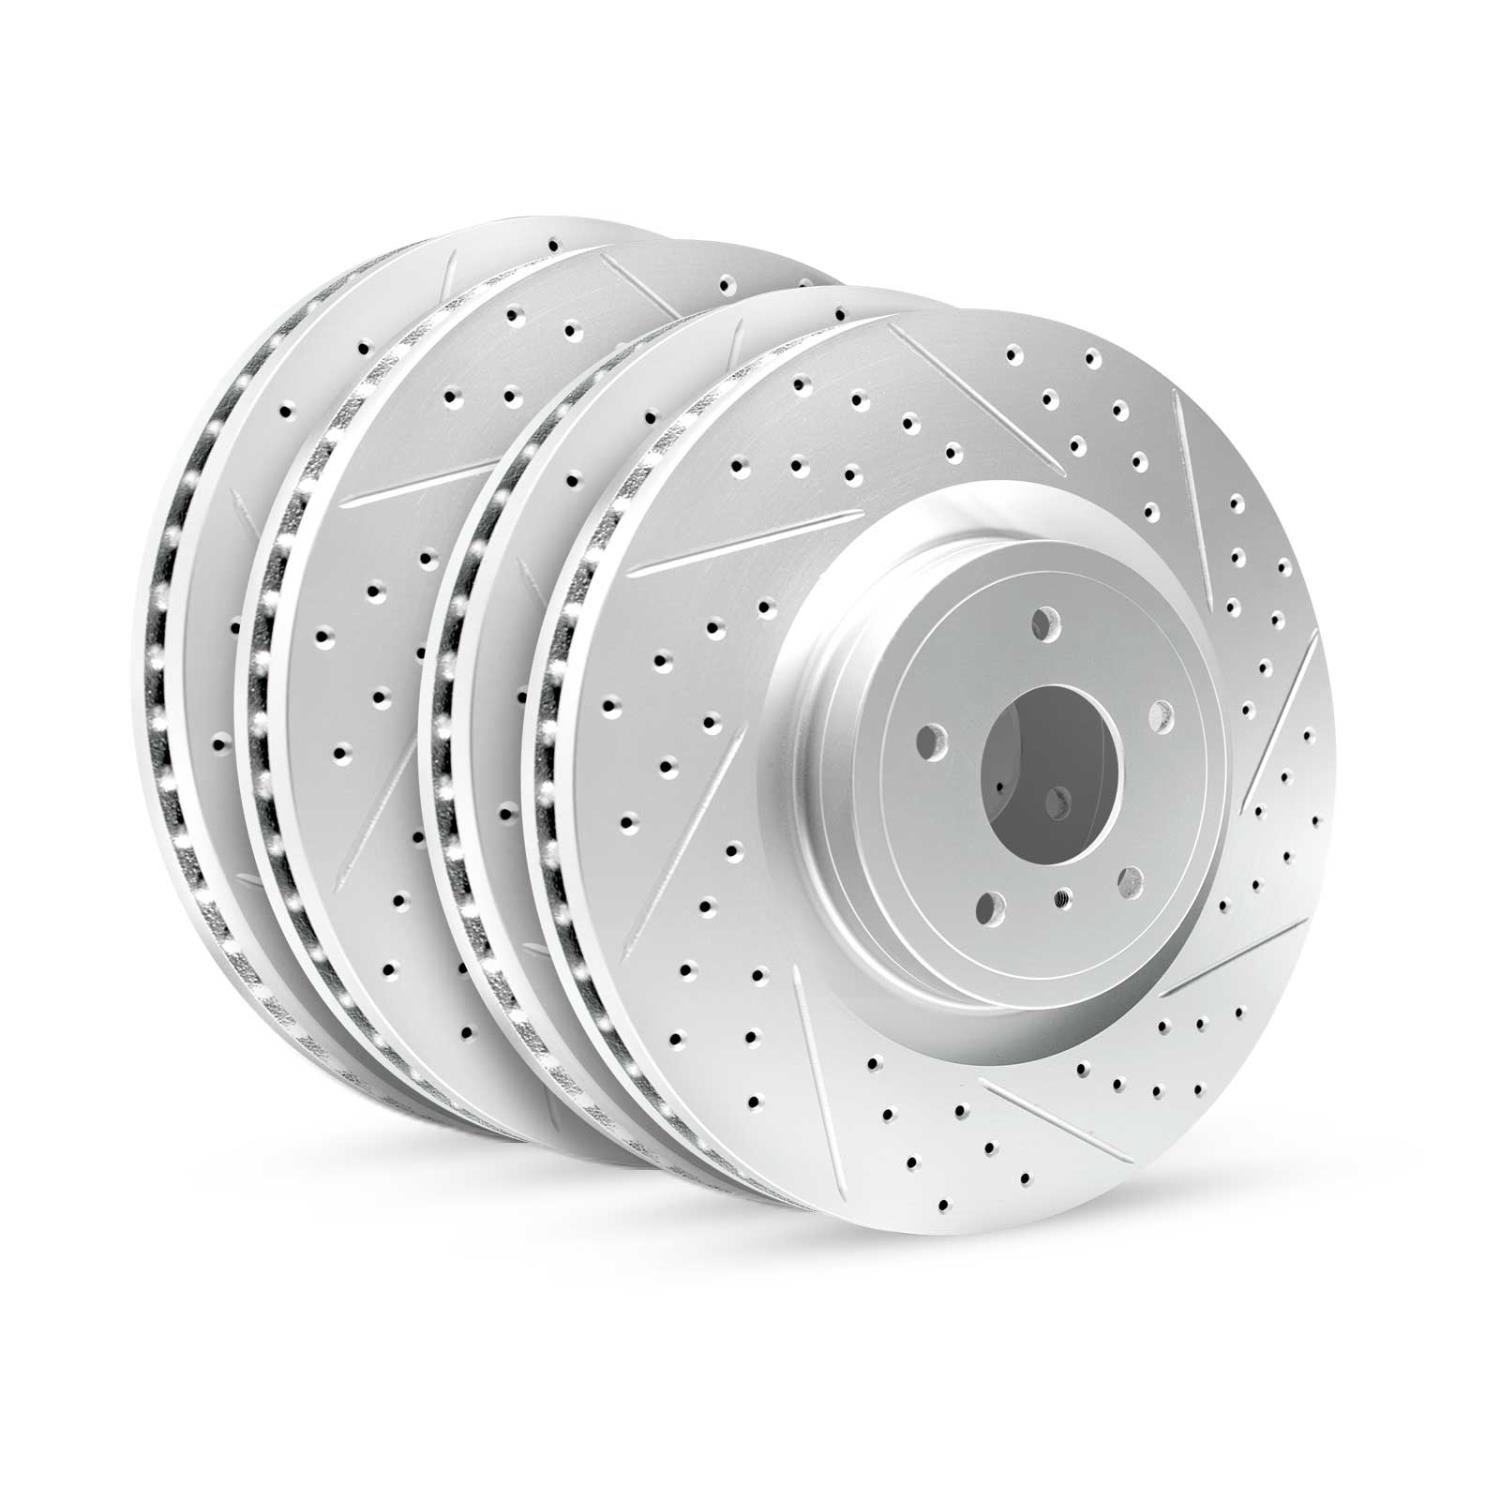 GEO-Carbon Drilled/Slotted Rotors, 2007-2010 Ford/Mazda,